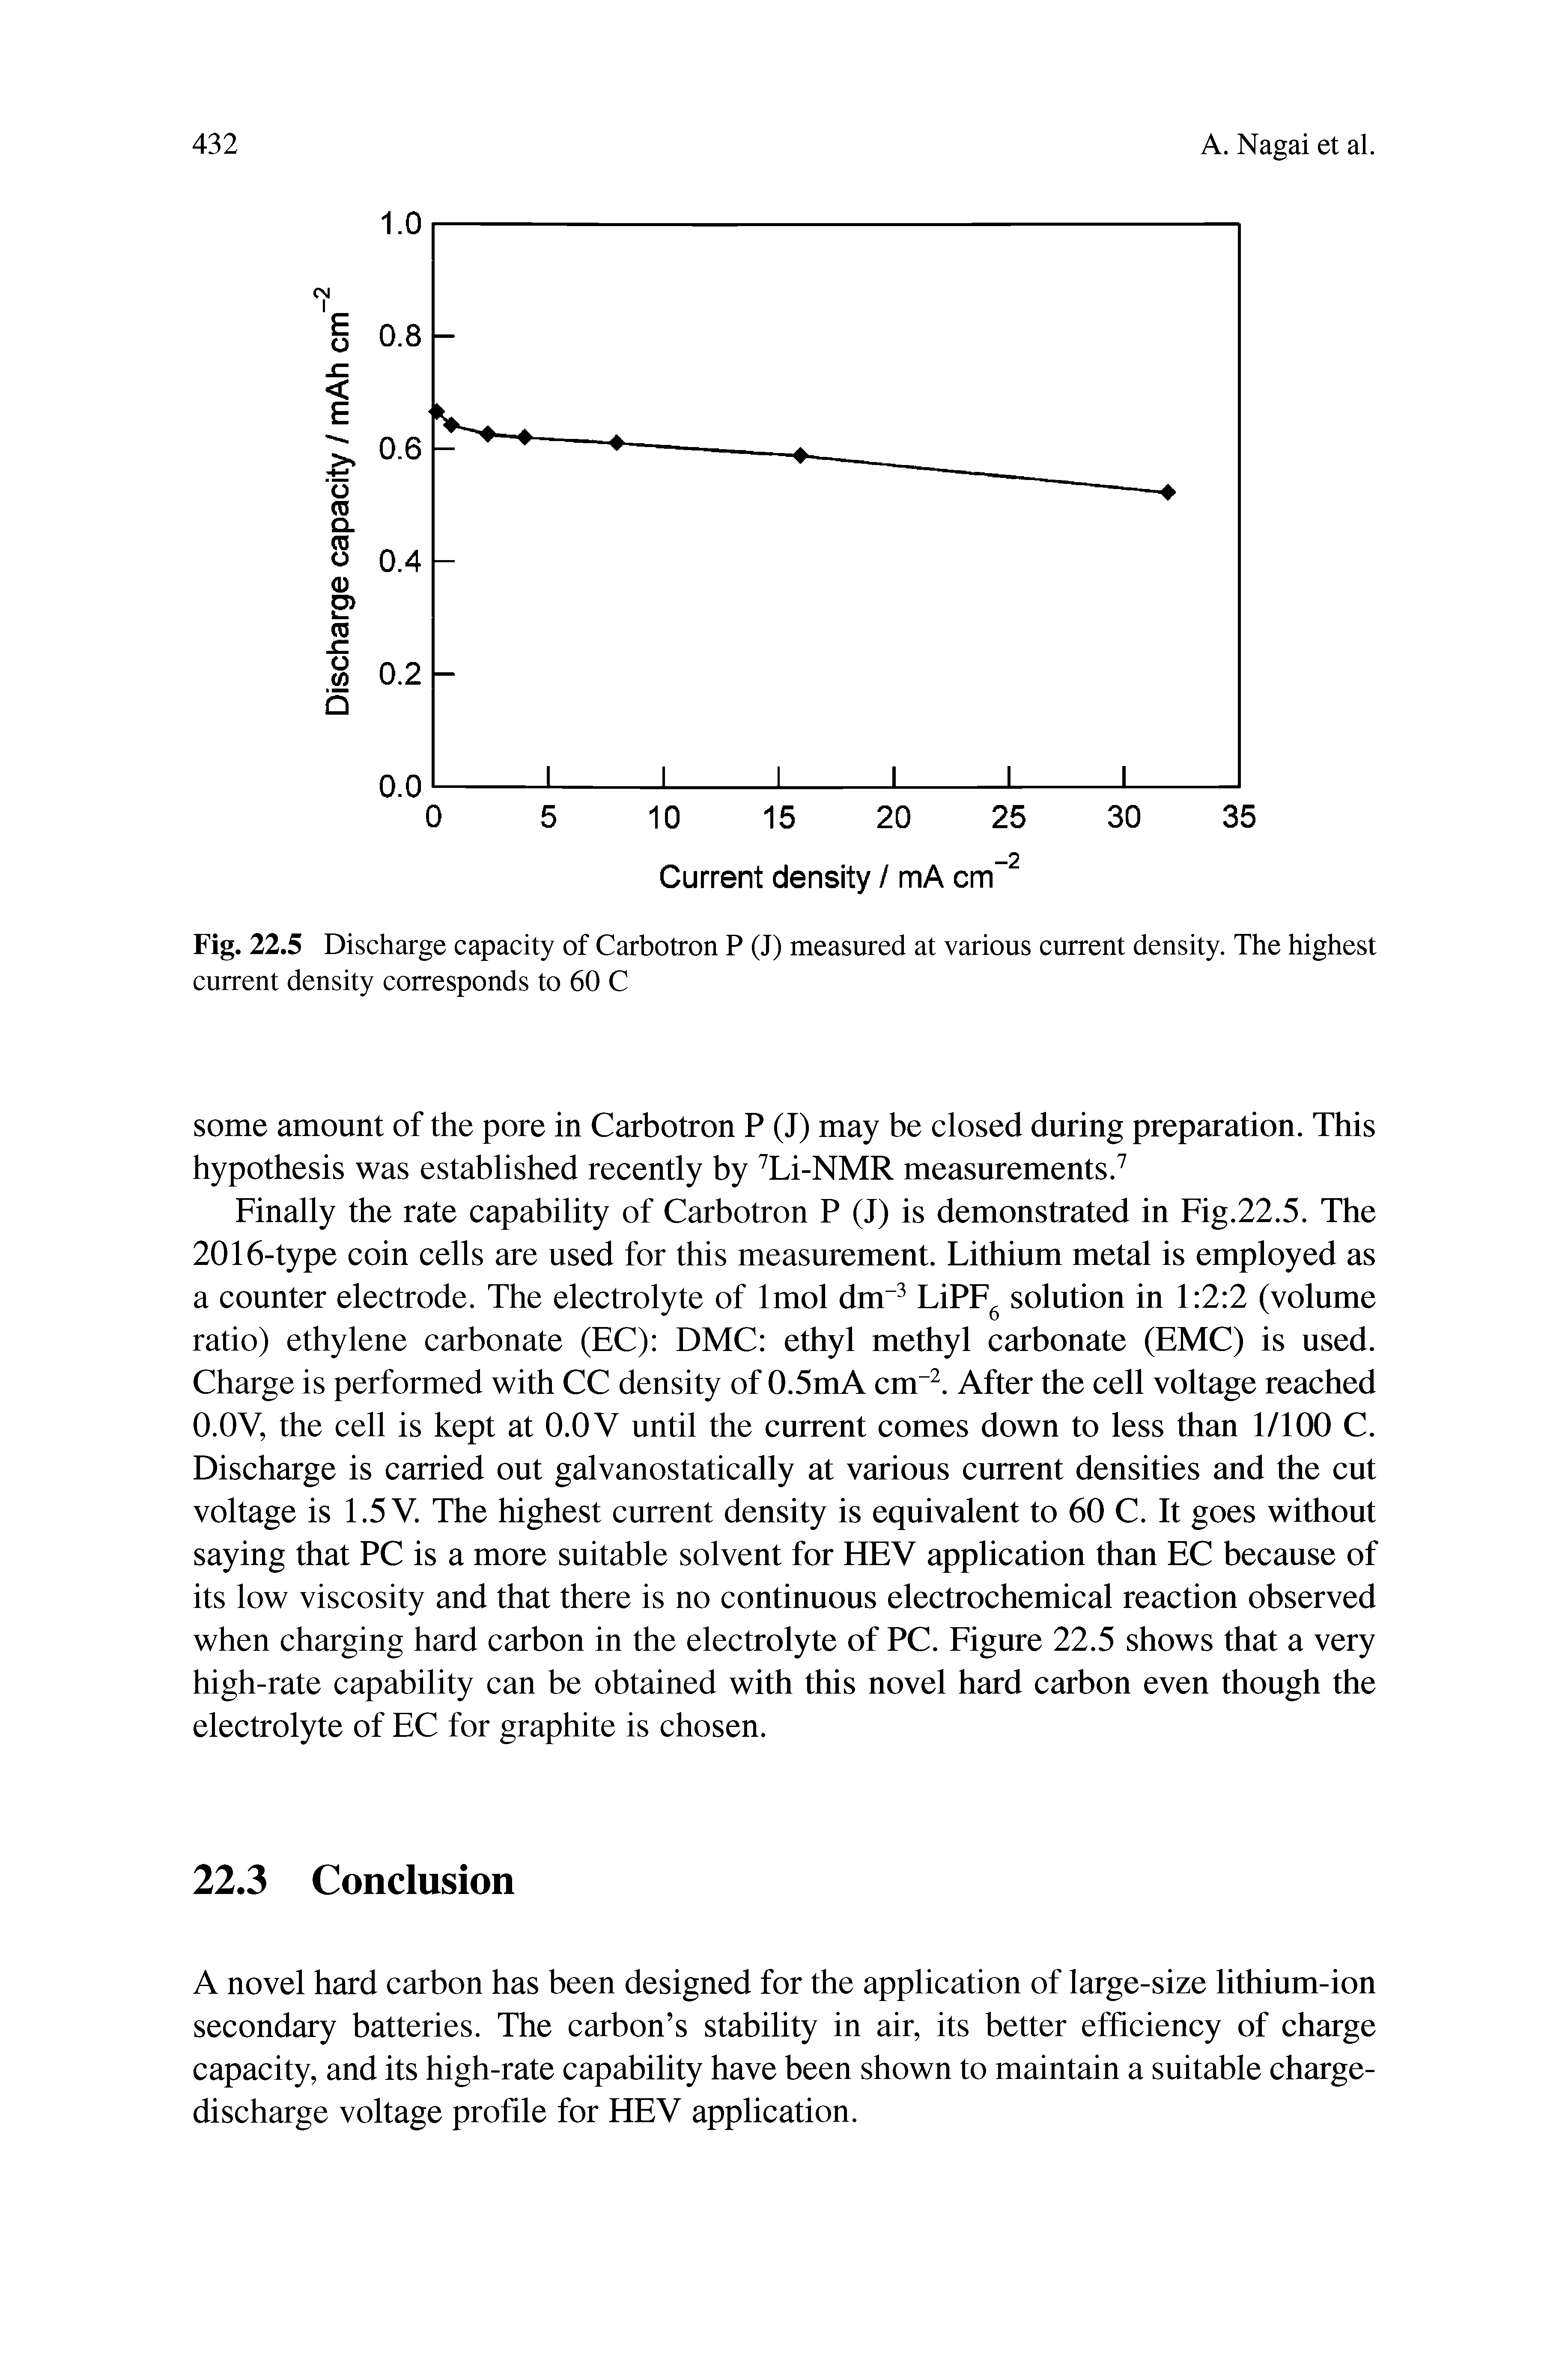 Fig. 22.5 Discharge capacity of Carbotron P (J) measured at various current density. The highest current density corresponds to 60 C...